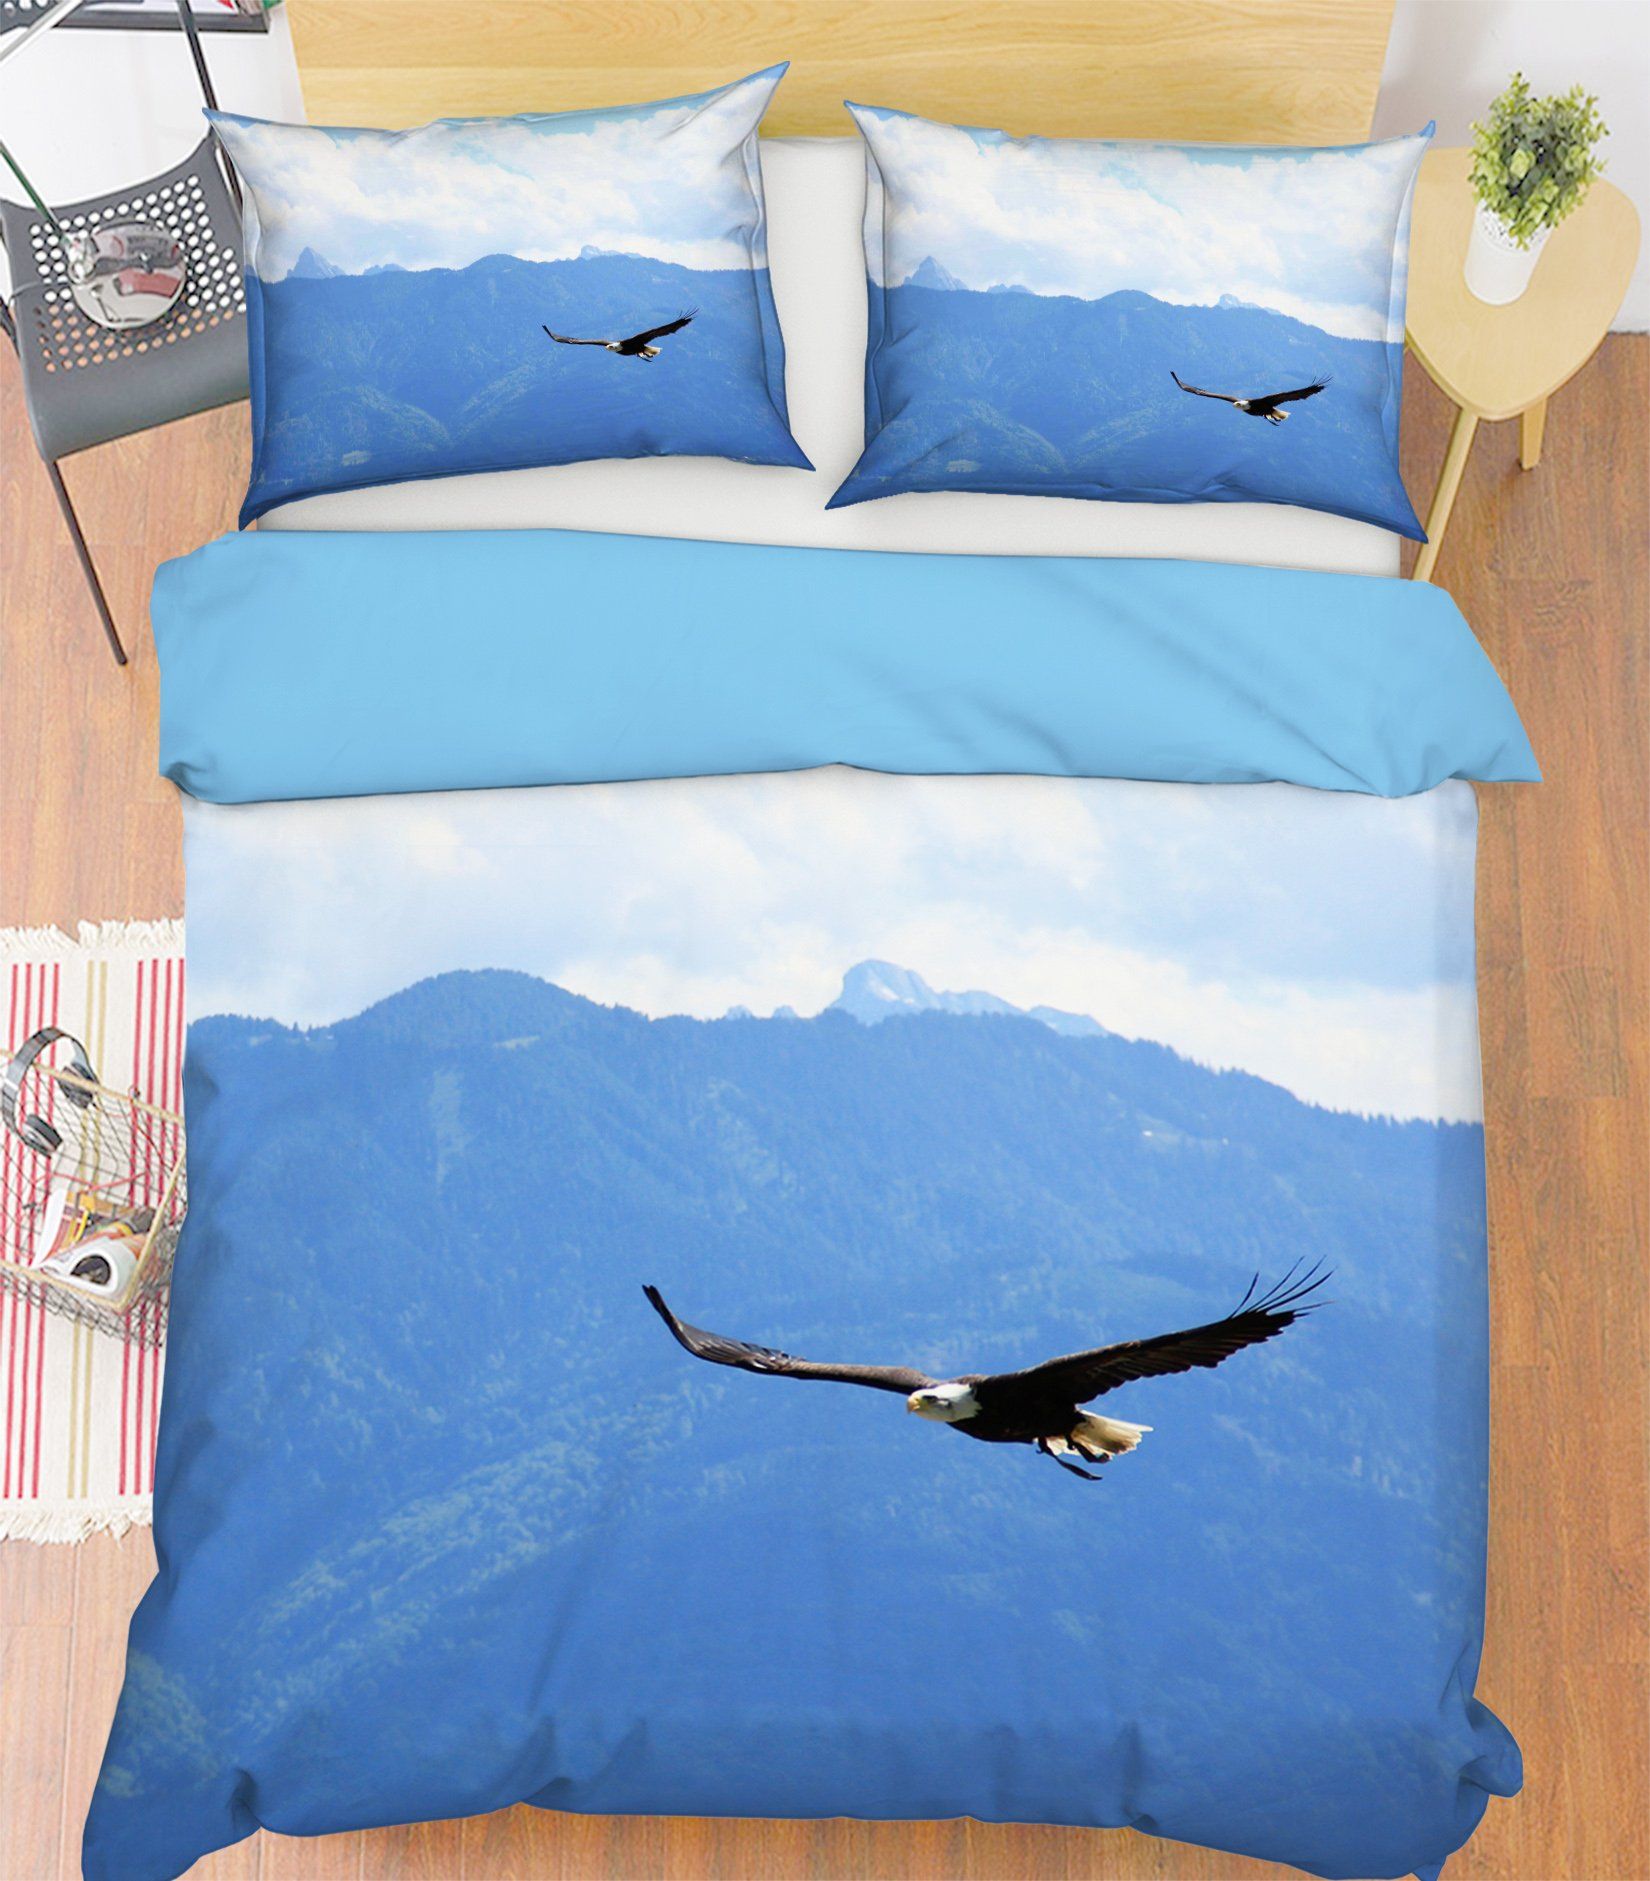 3D Soaring Eagle 1909 Bed Pillowcases Quilt Quiet Covers AJ Creativity Home 